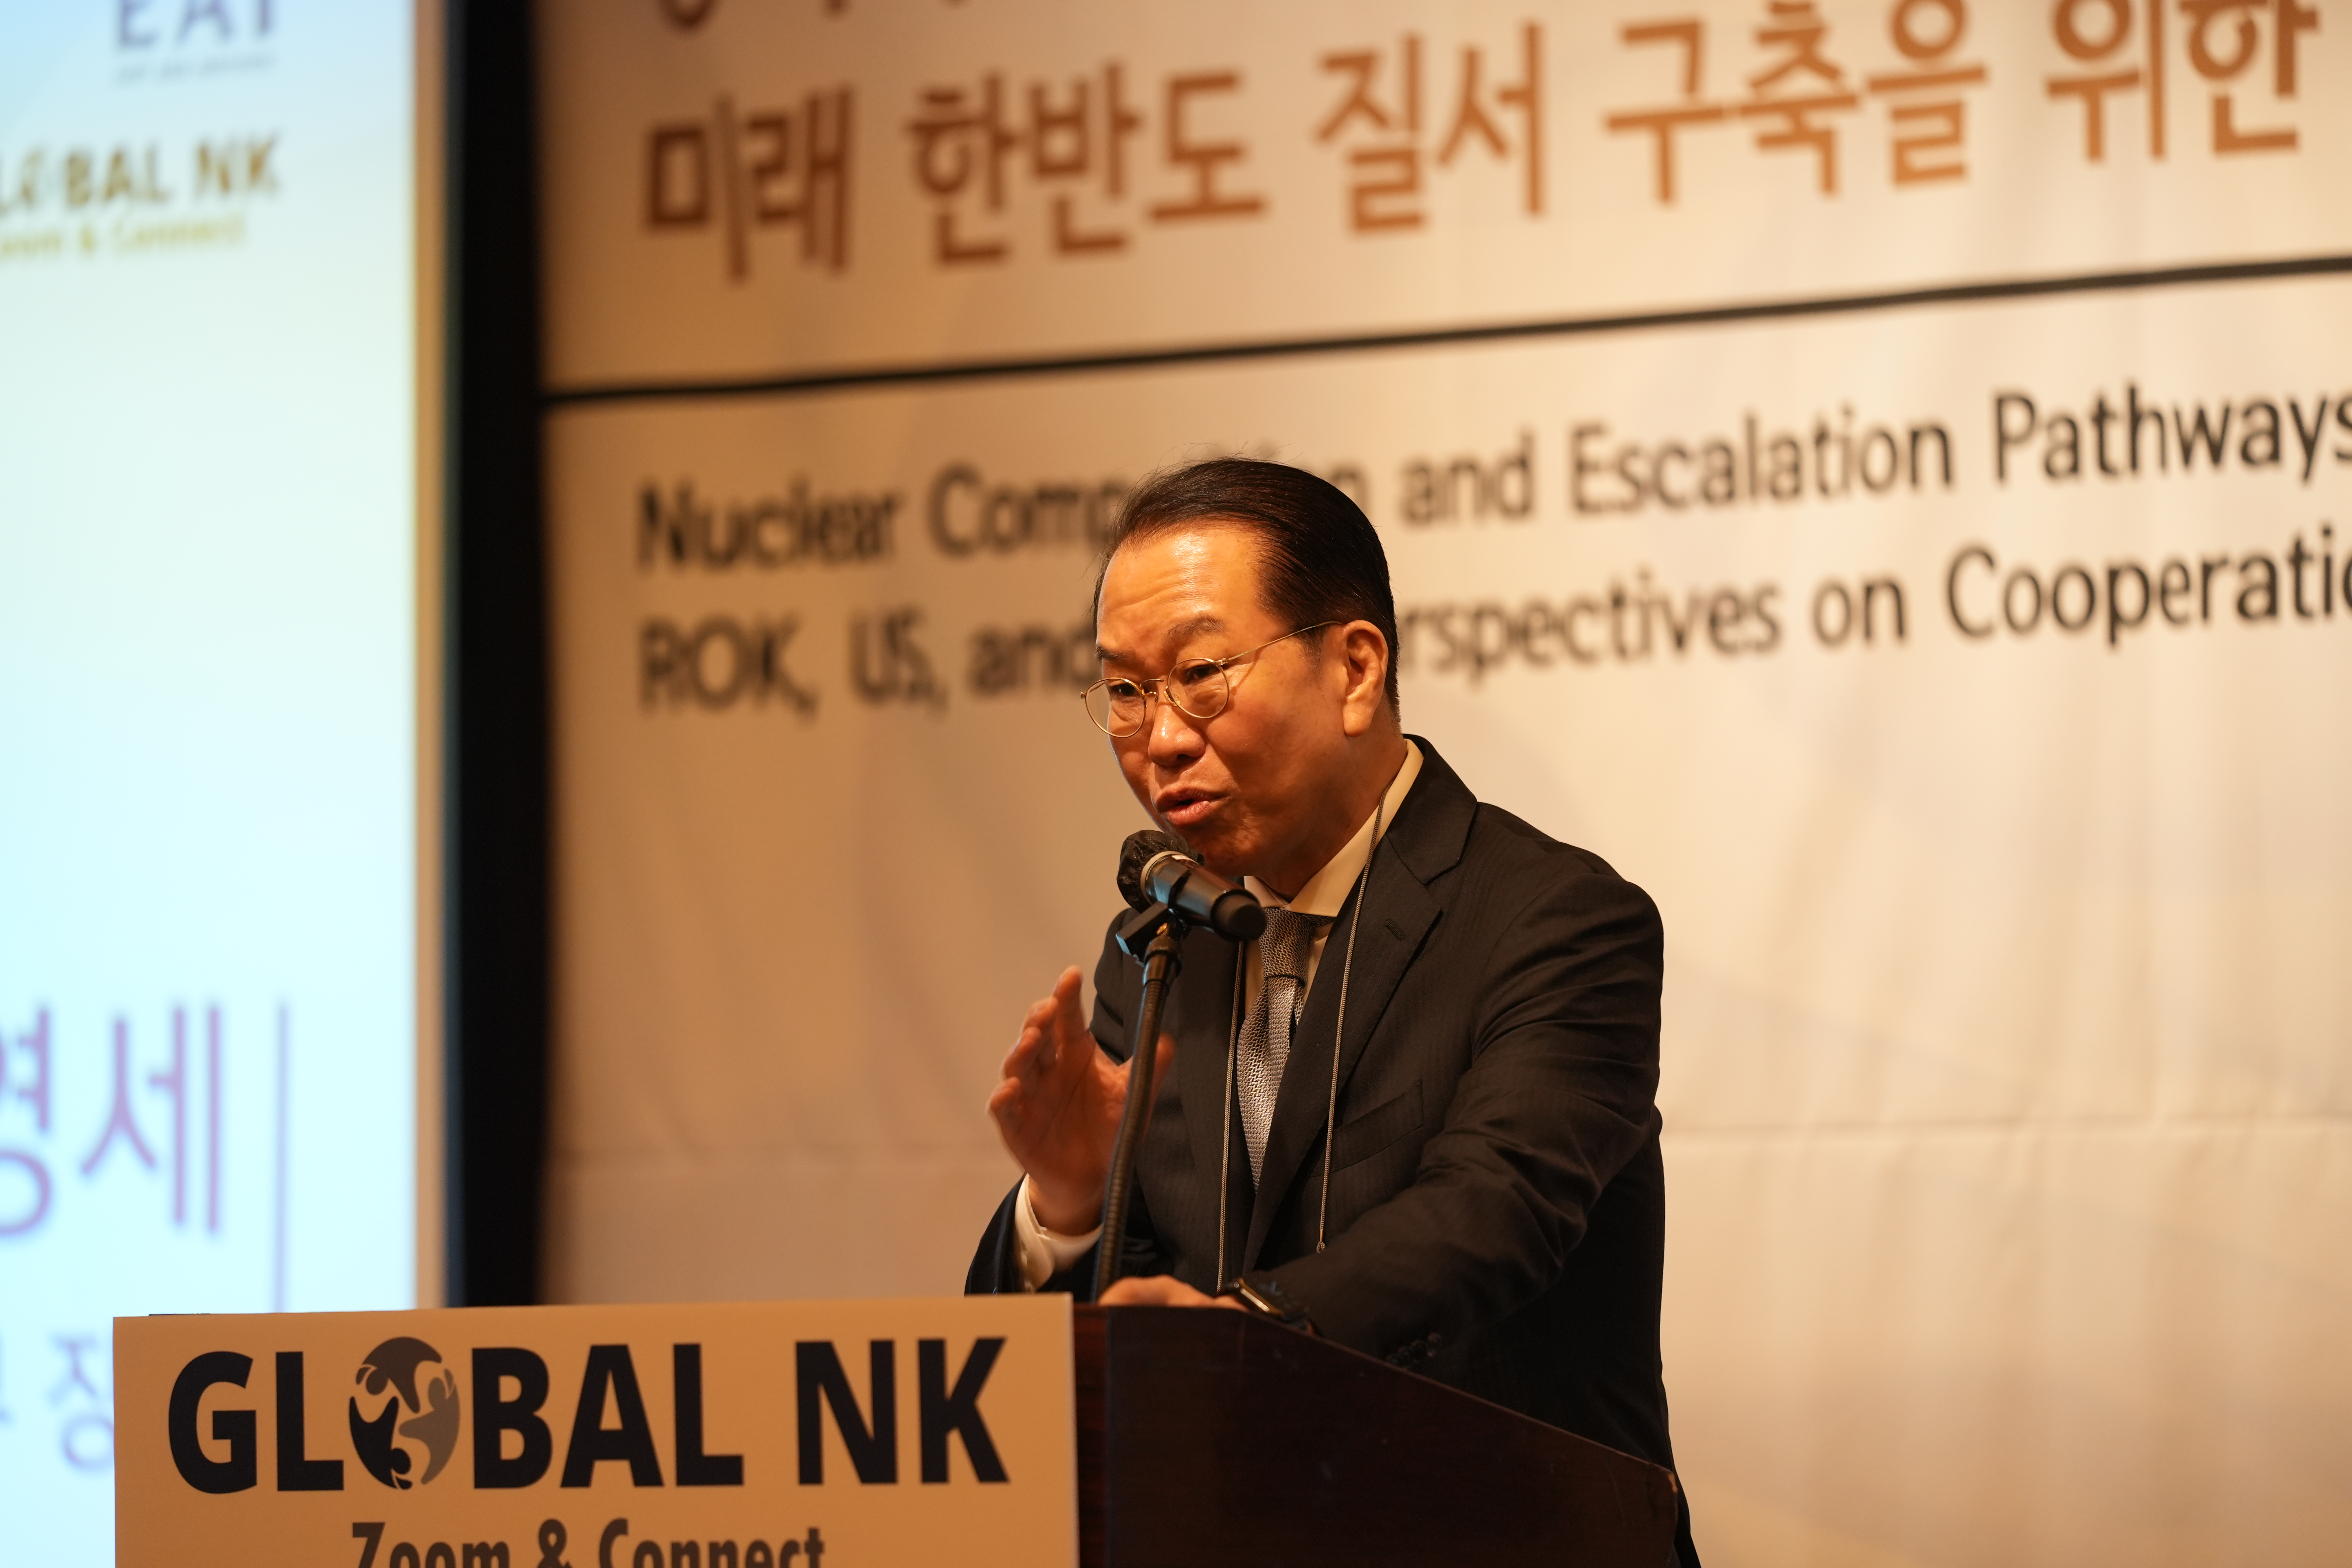 Global NK International Conference “Nuclear Competition and Escalation Pathways in East Asia: ROK, US, and PRC Perspectives on Cooperation for the Future of the Korean Peninsula” 